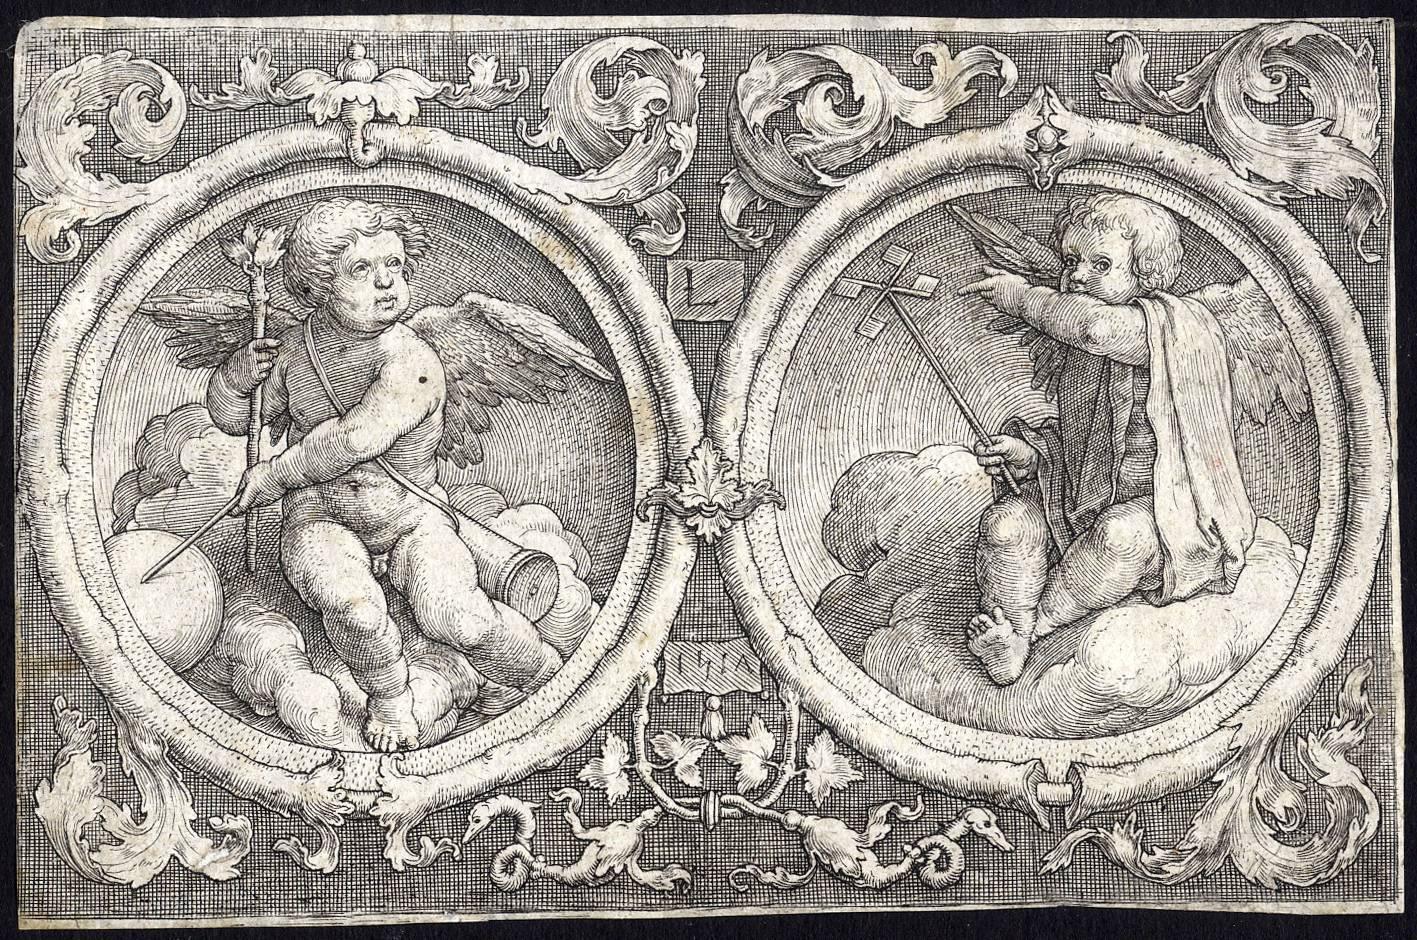 Lucas van Leyden Figurative Print - Untitled - Two putti seated on clouds in circles with grotesque tendrils.